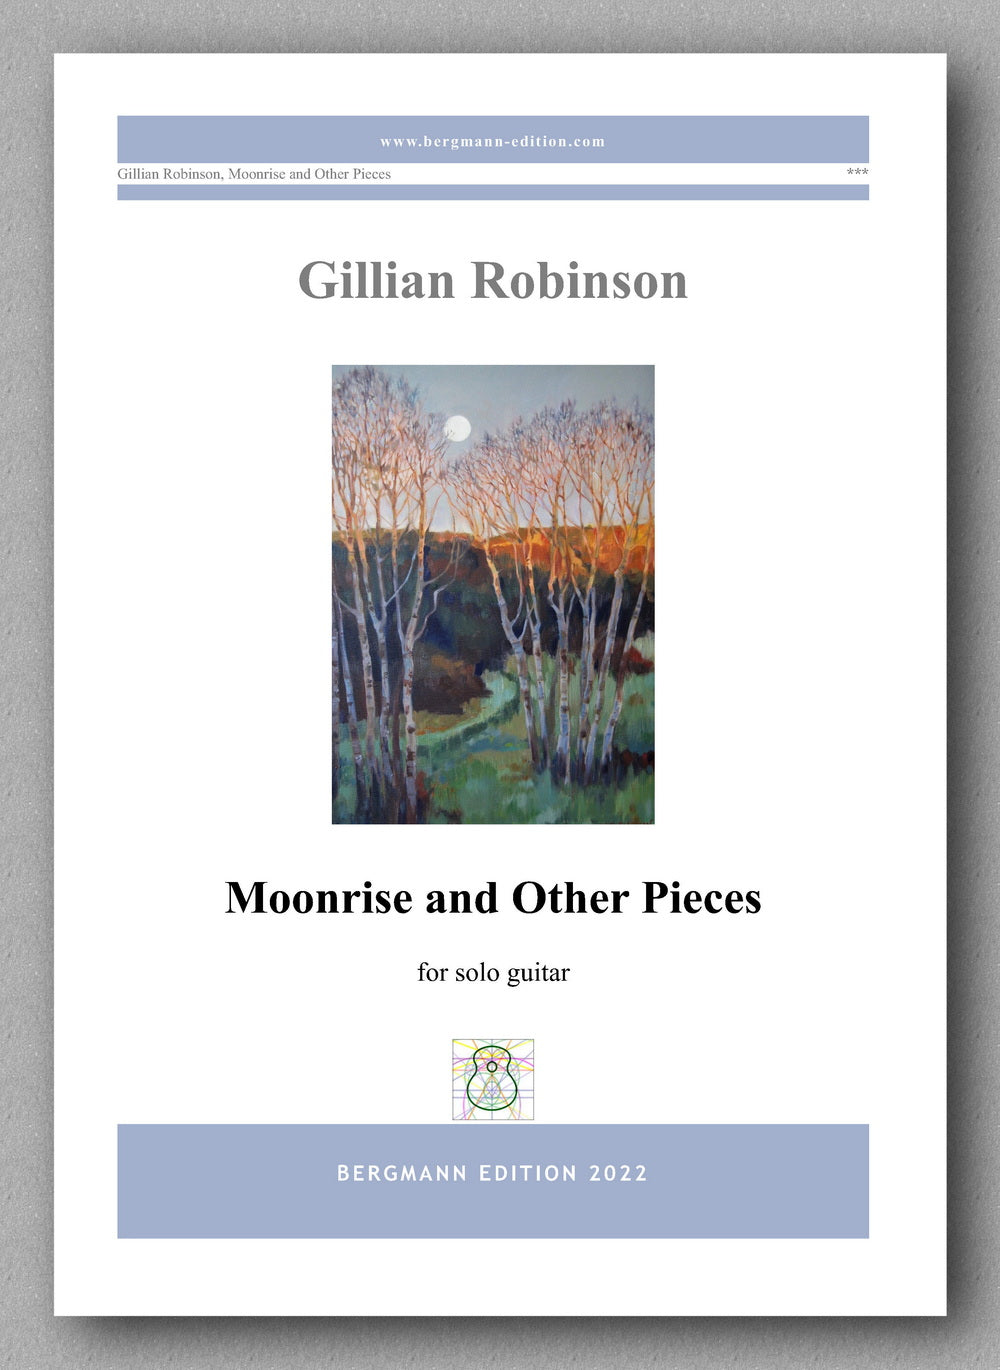 Robinson, Moonrise and Other Pieces - cover